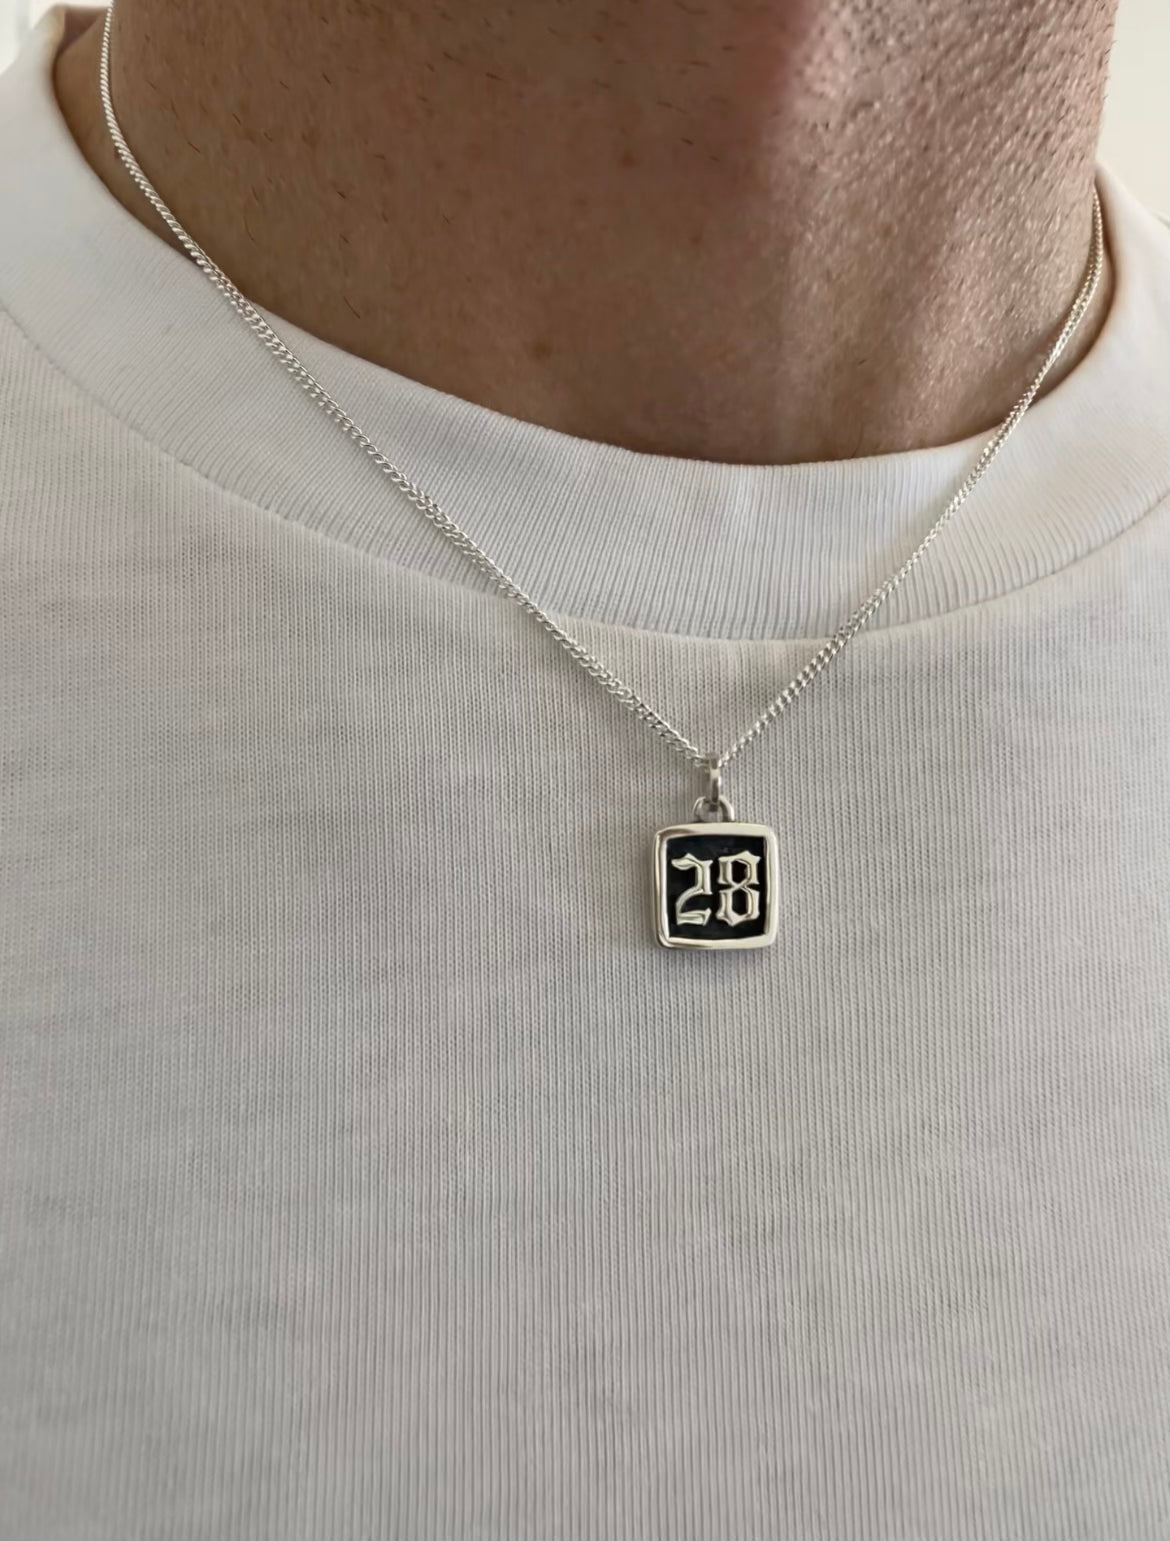 Numeral Necklace